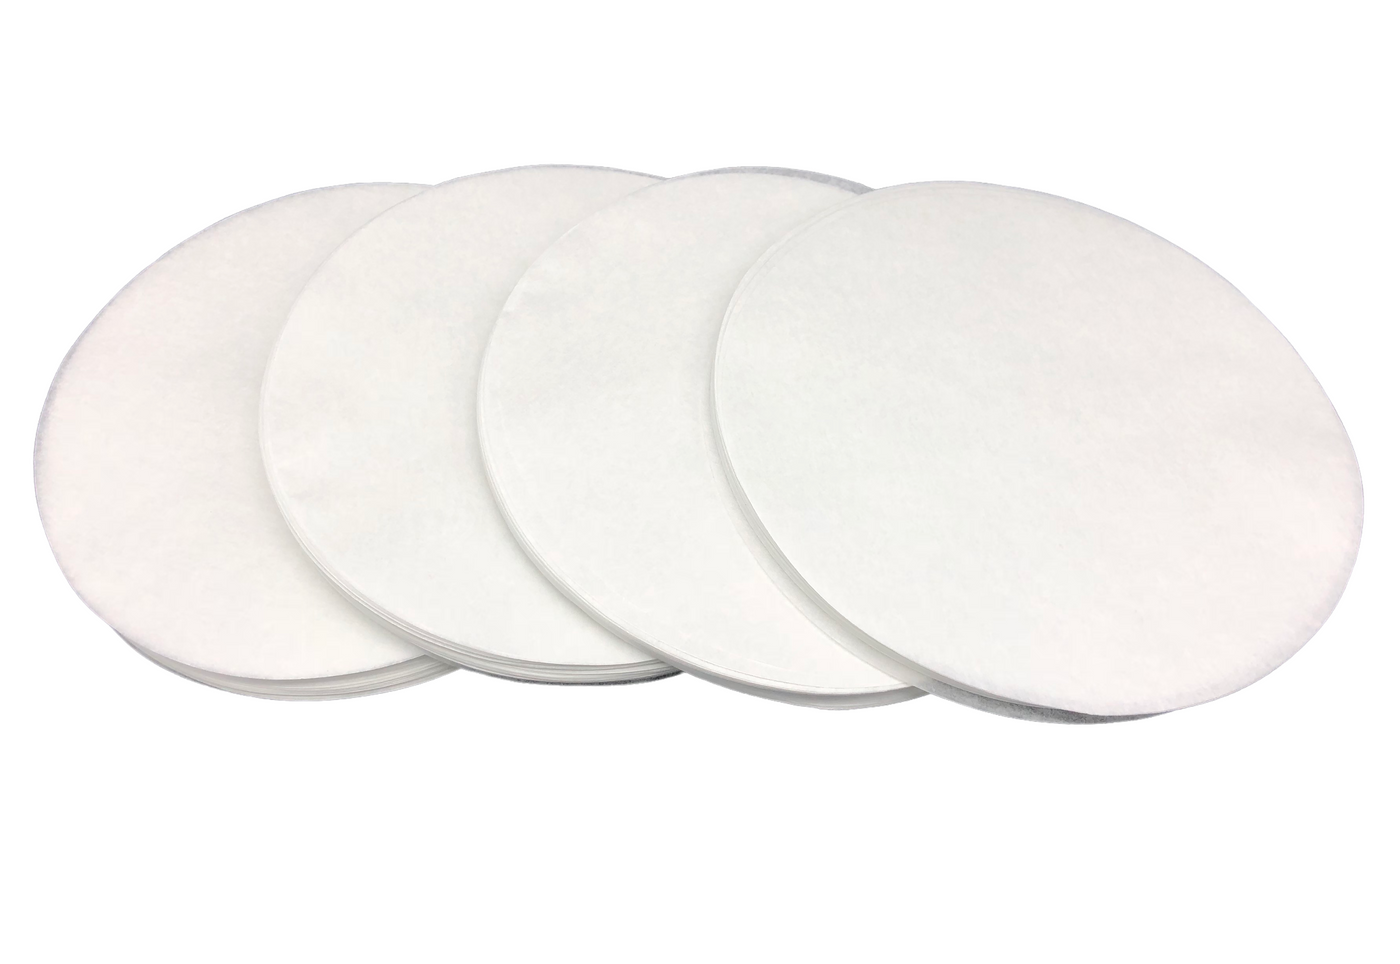 Baklicious 250pcs 8 inch Parchment Paper Rounds. Non Stick Round Parchment Paper, Baking Parchment Circles for Cake Baking, Patty Separating